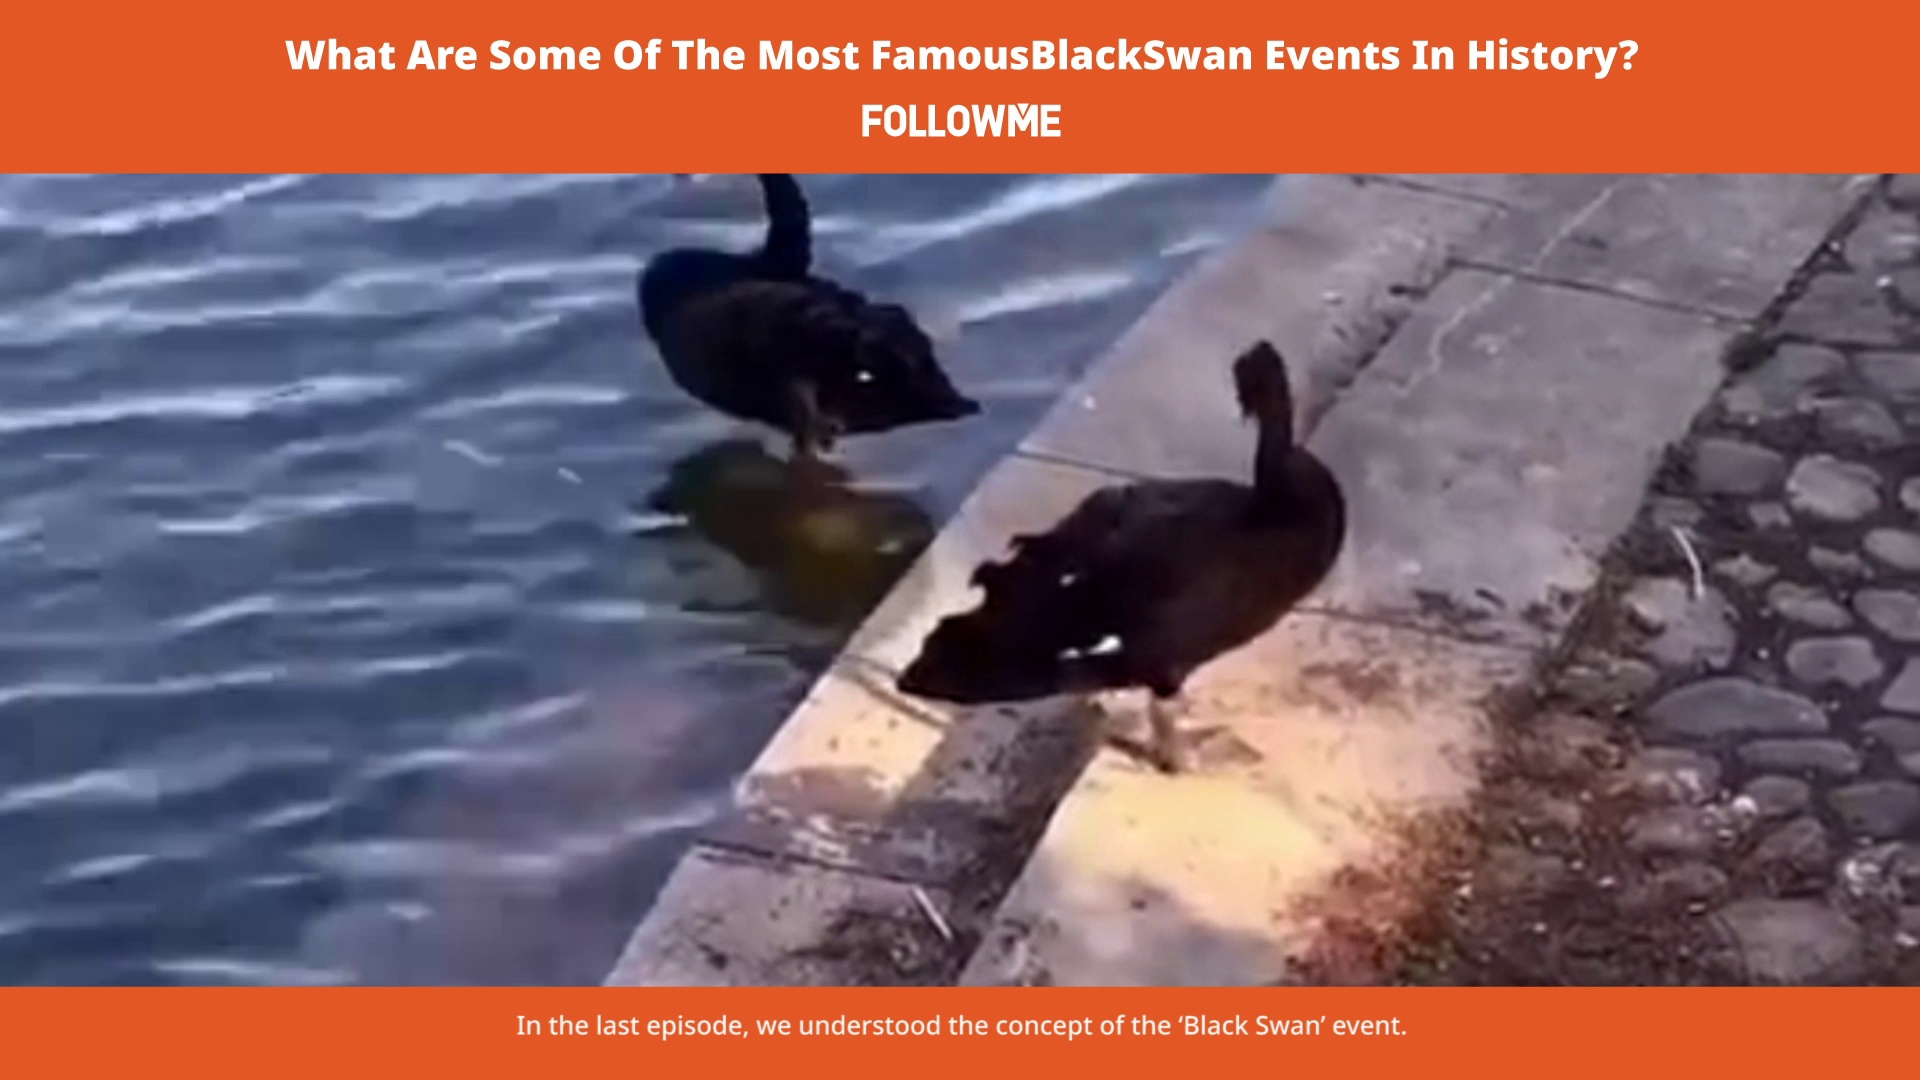 What are some of the most famous "BlackSwan" Events in history?
[[1,#Knowledge#,10001092]][[1,#NegativeOilPrice#,10003760]][[1,#NewTraders#,10001315]]